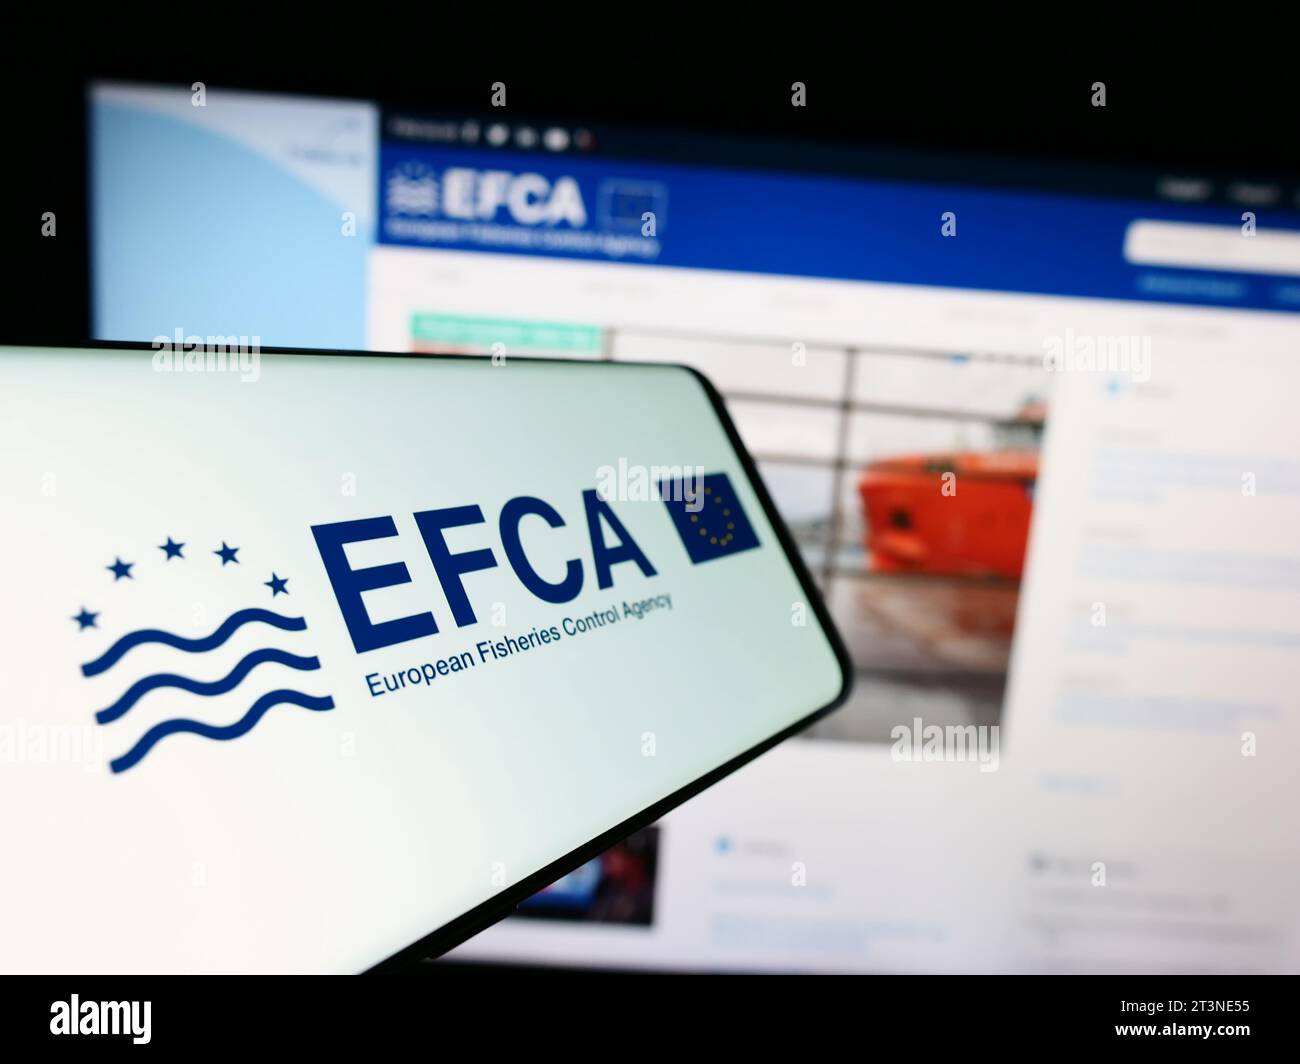 Smartphone with logo of EU institution European Fisheries Control Agency (EFCA) in front of website. Focus on center of phone display. Stock Photo